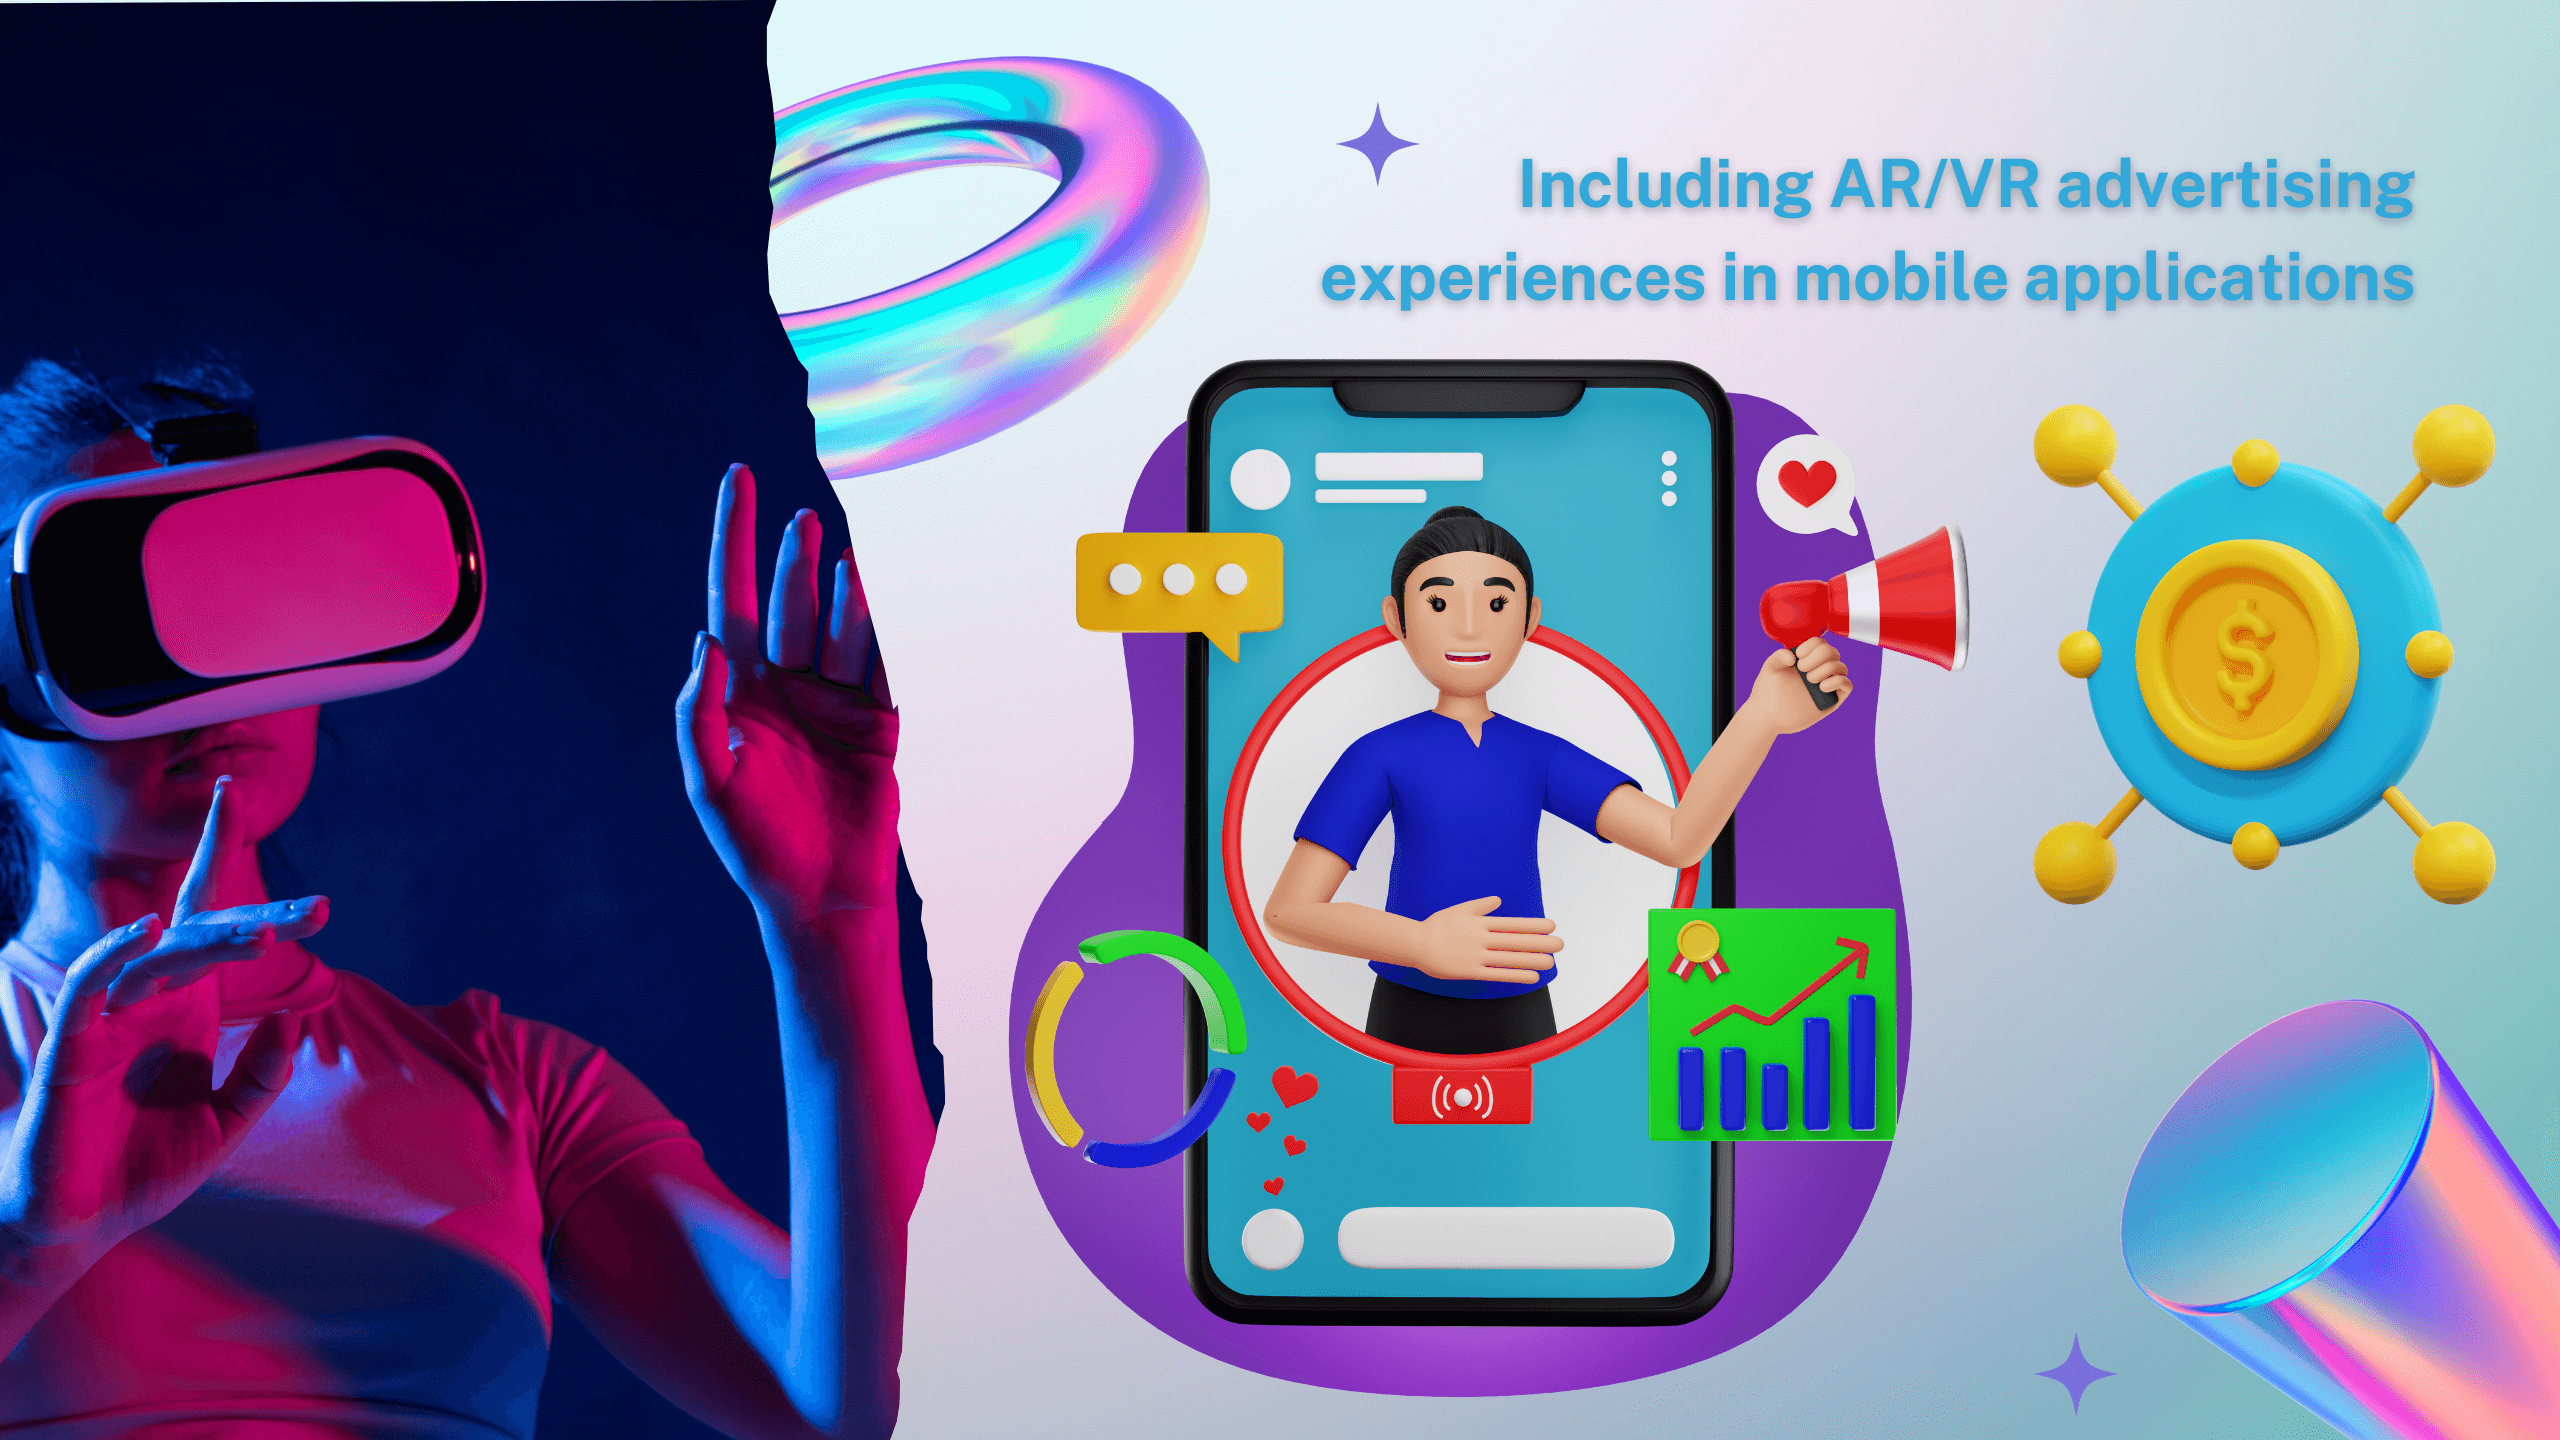 Including AR/VR advertising experiences in mobile applications